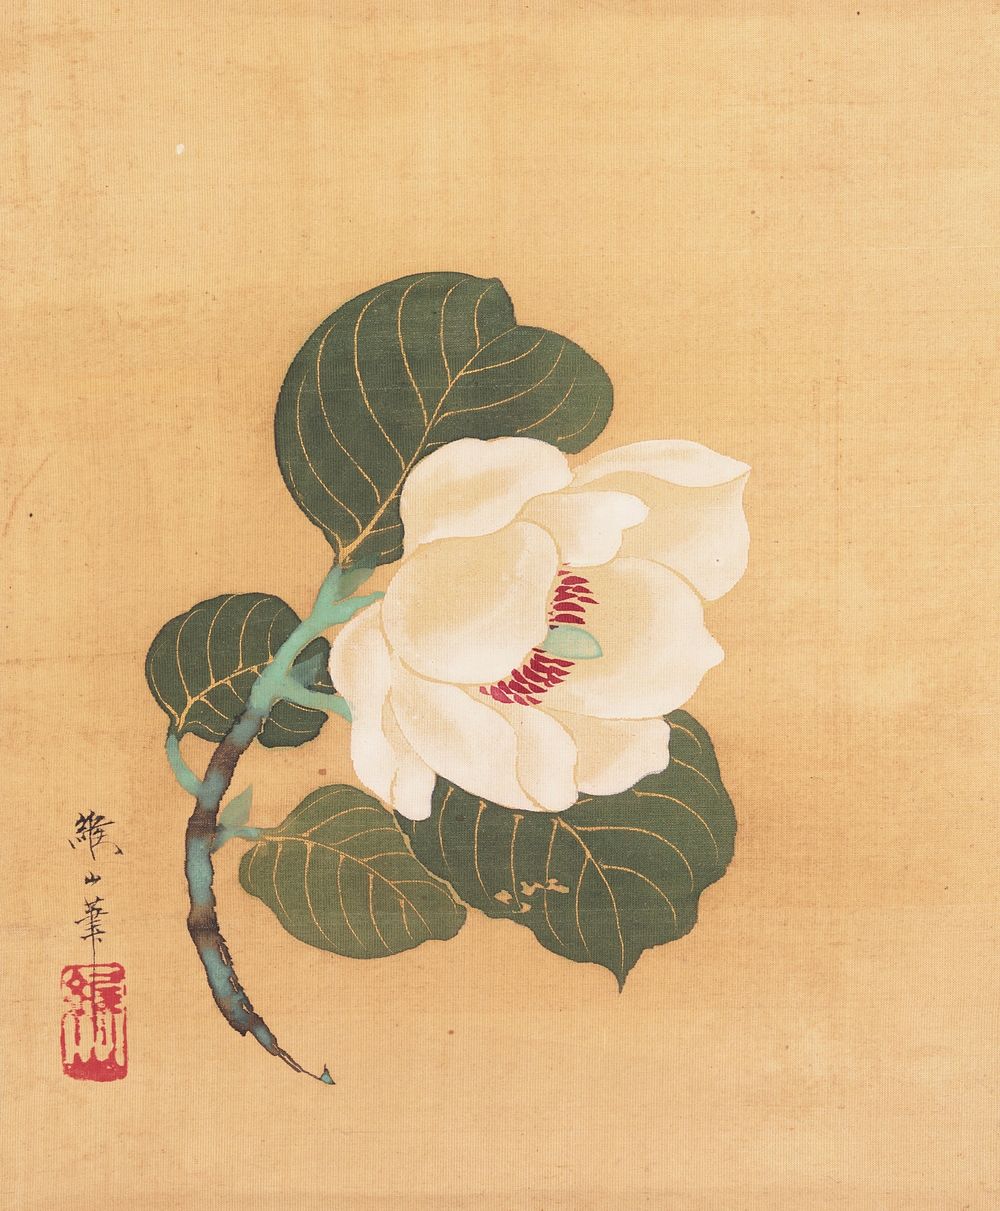 3/4 view of white flower with red stamen and green pistil; rounded green leaves painted with gold veins; on a curving, short…